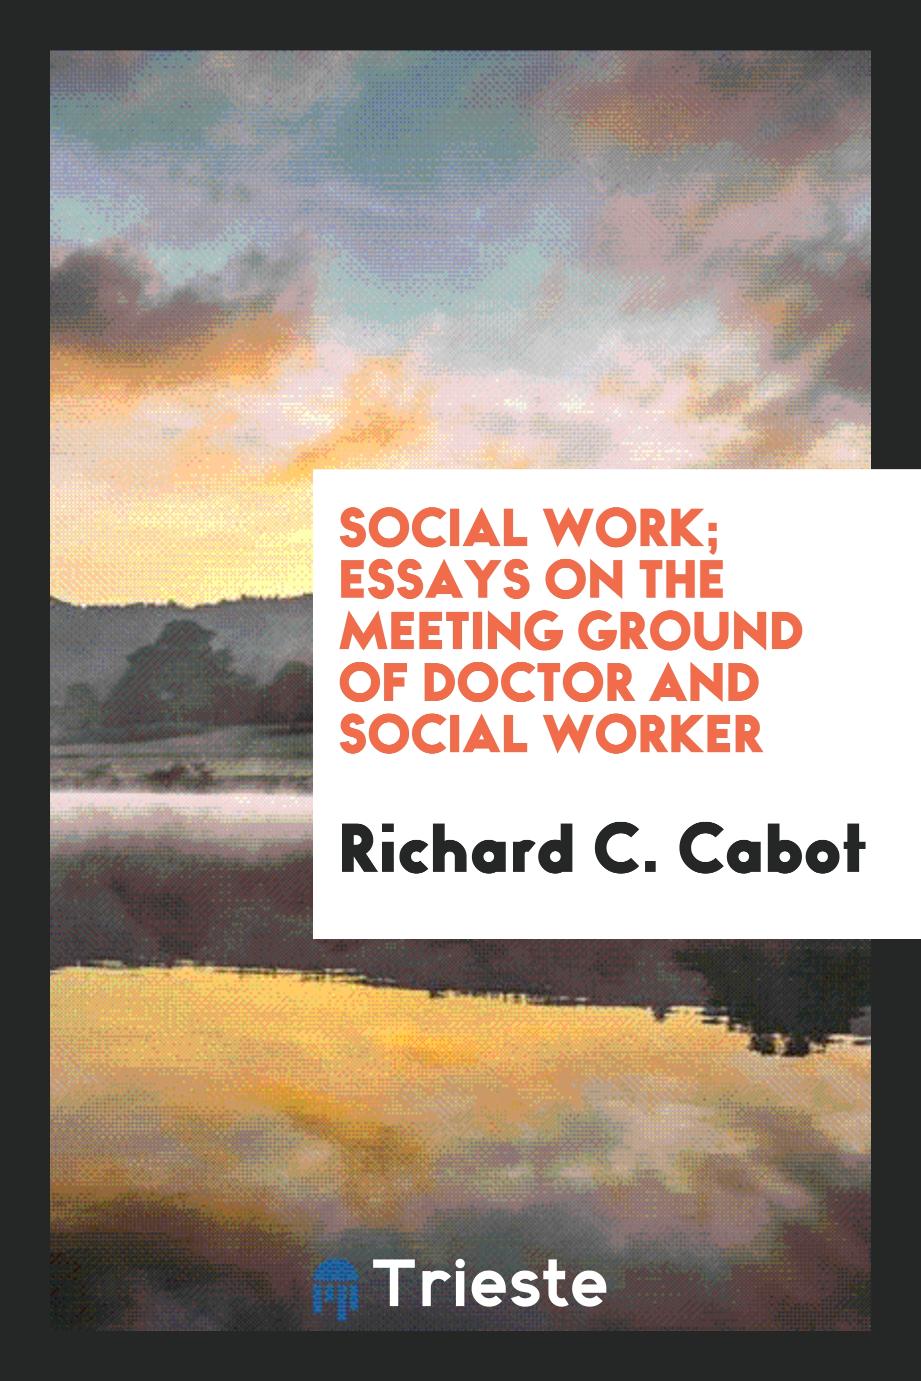 Social work; essays on the meeting ground of doctor and social worker